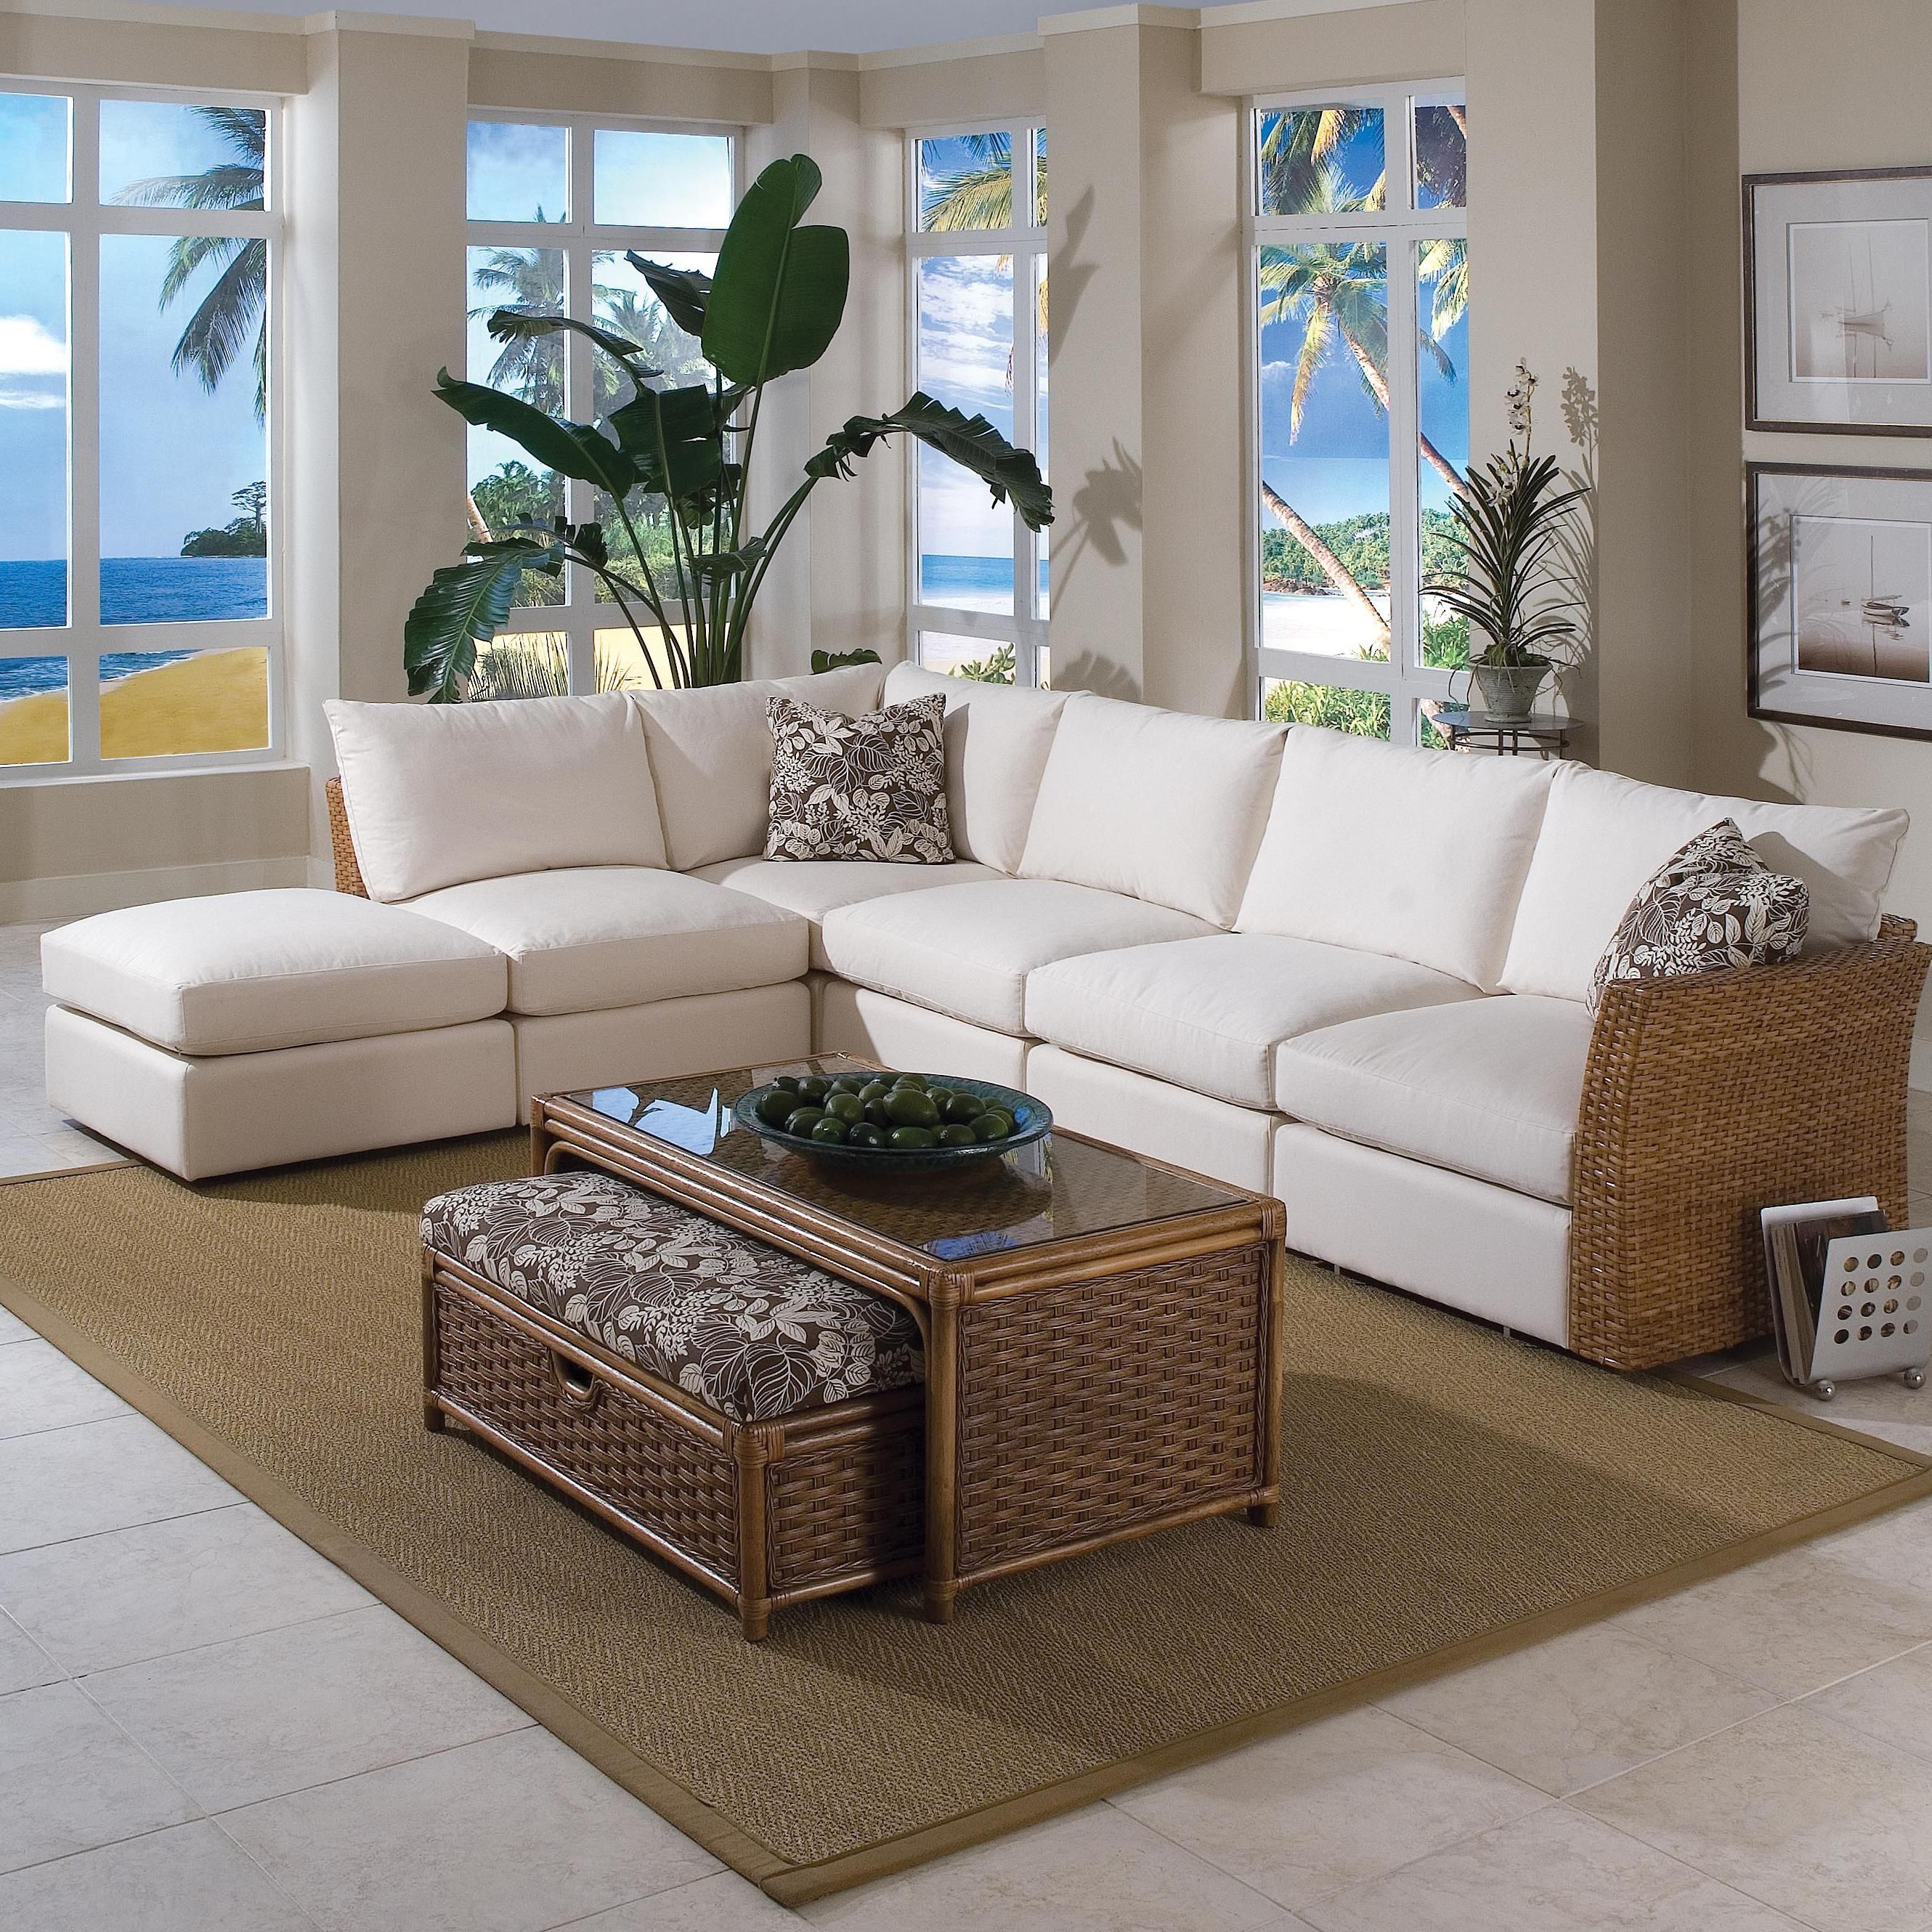 Braxton Culler Grand Water Point Tropical Sectional Sofa With Two In Johnson City Tn Sectional Sofas (View 10 of 10)